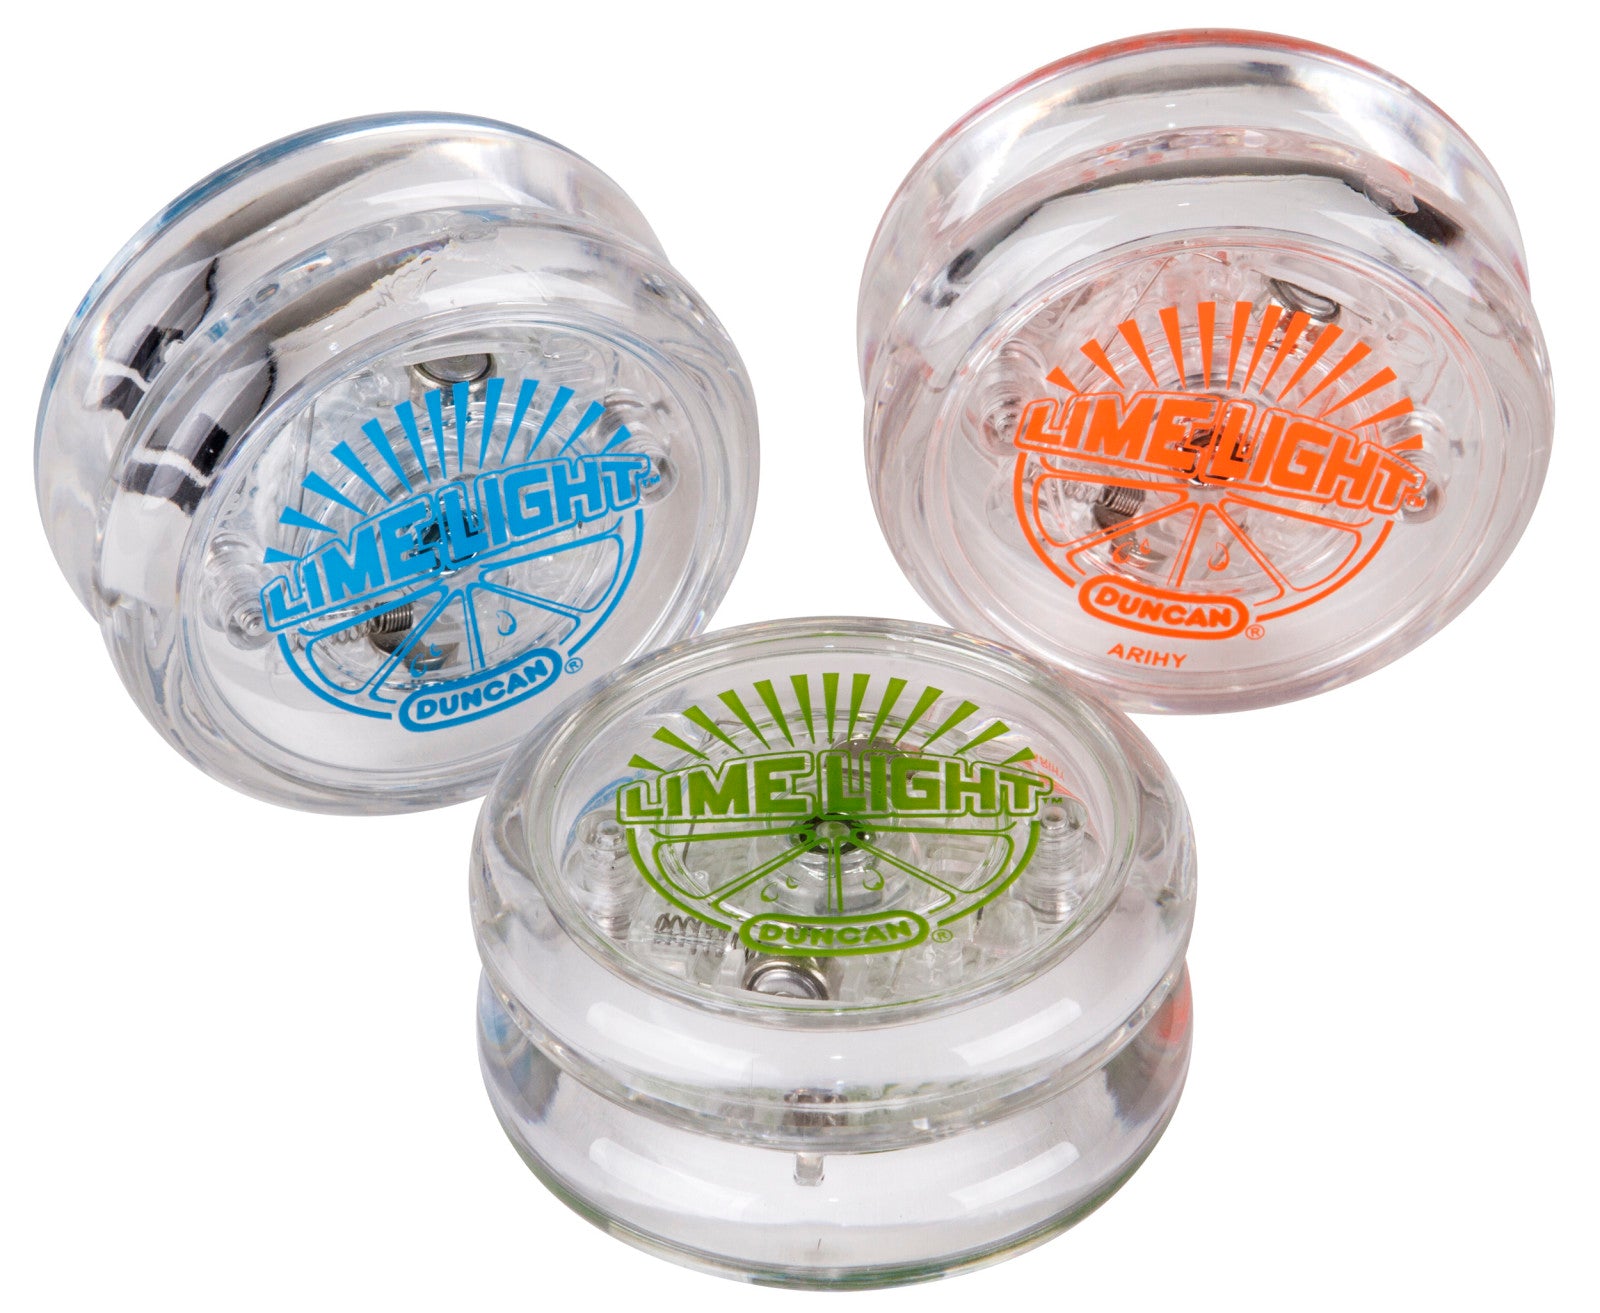 Duncan Yo Yo Beginner Lime Light (Assorted Colours) - Toybox Tales